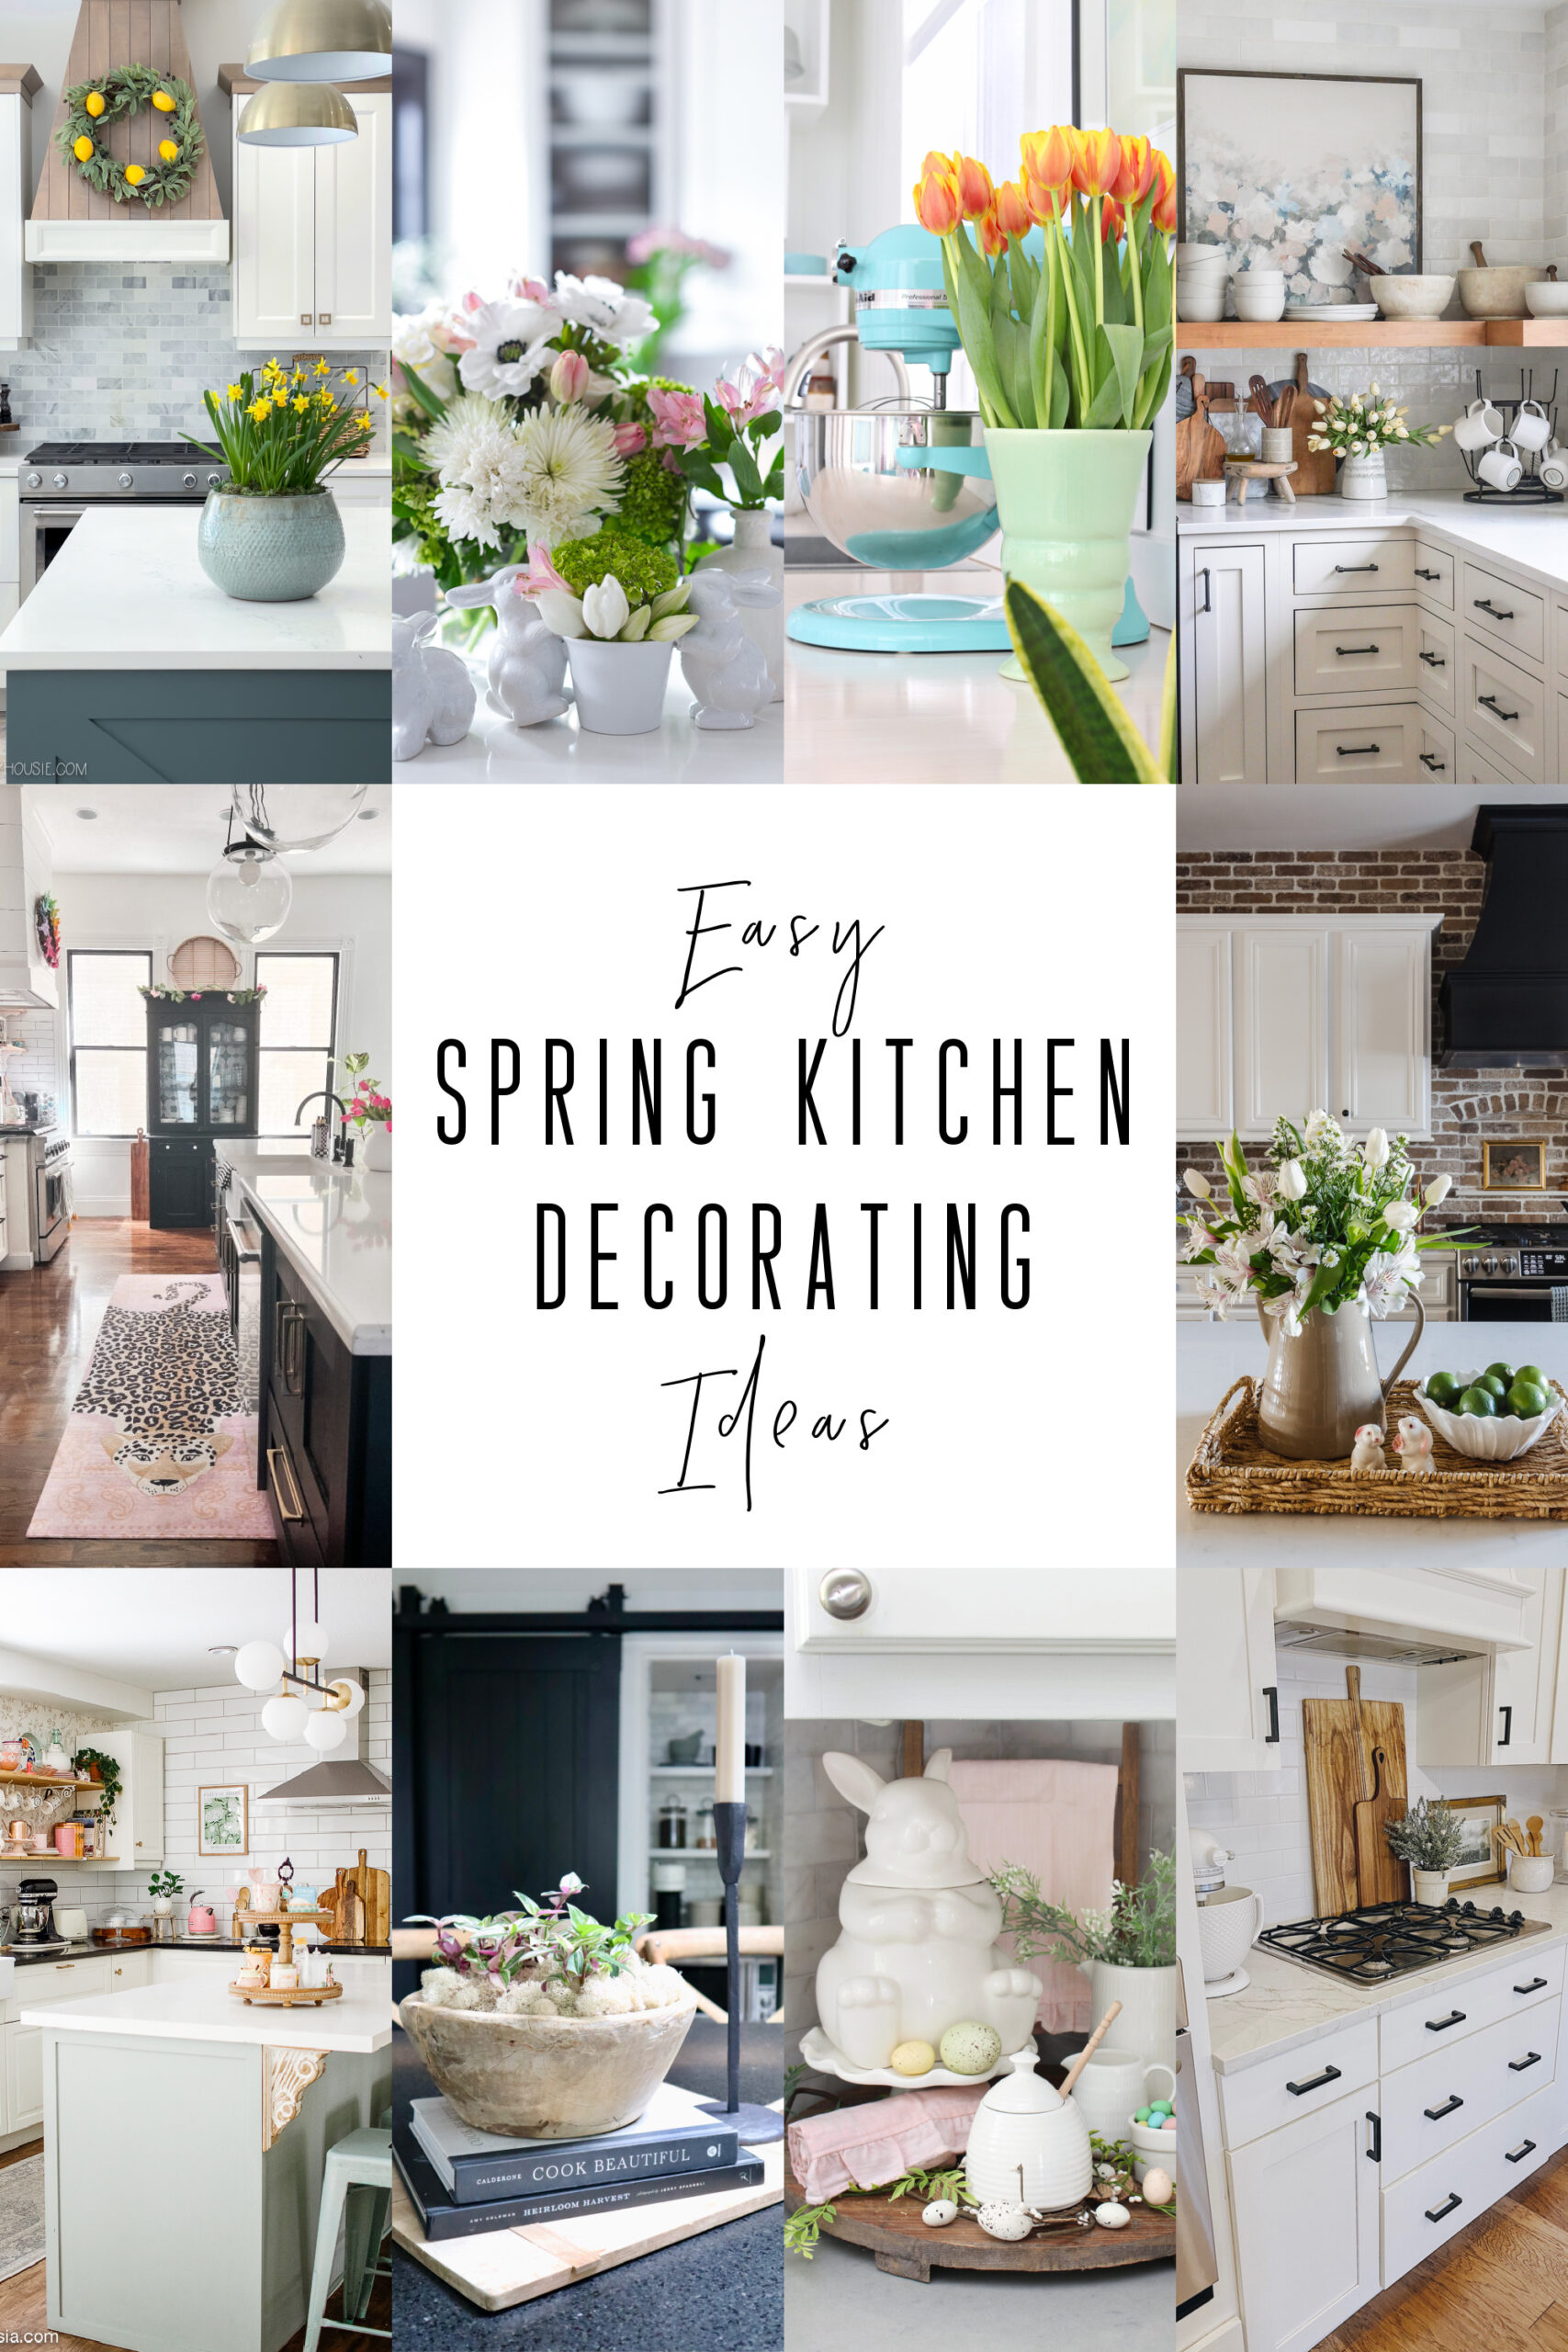 https://www.thehappyhousie.com/wp-content/uploads/2022/03/Easy-Spring-Kitchen-Decorating-Ideas-and-Tips-scaled.jpg